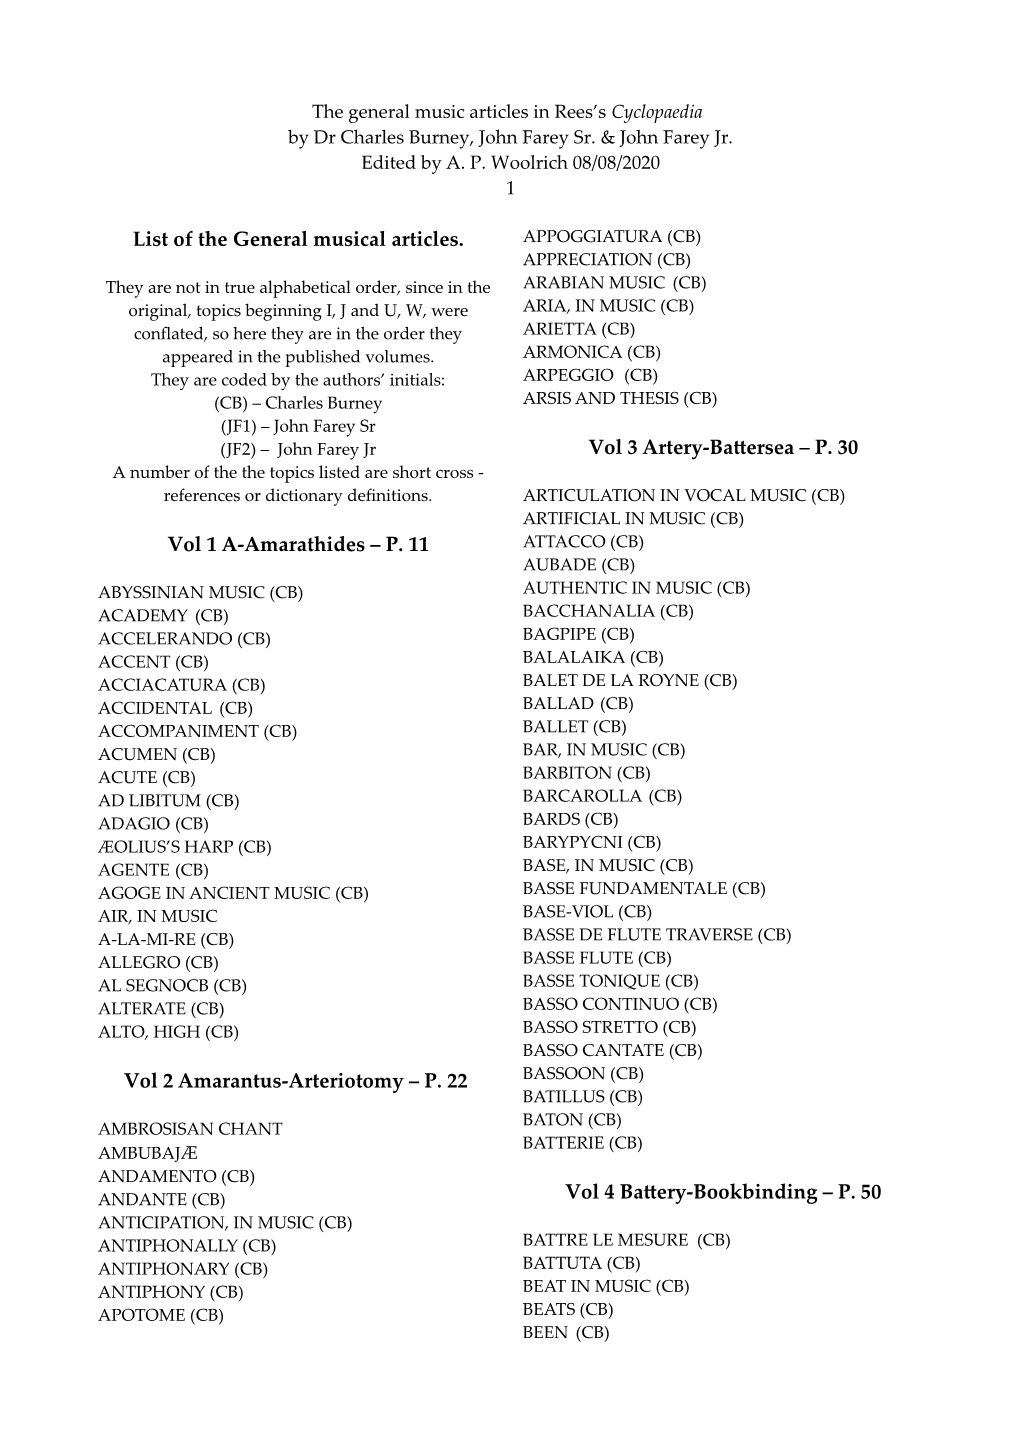 List of the General Musical Articles. Vol 1 A